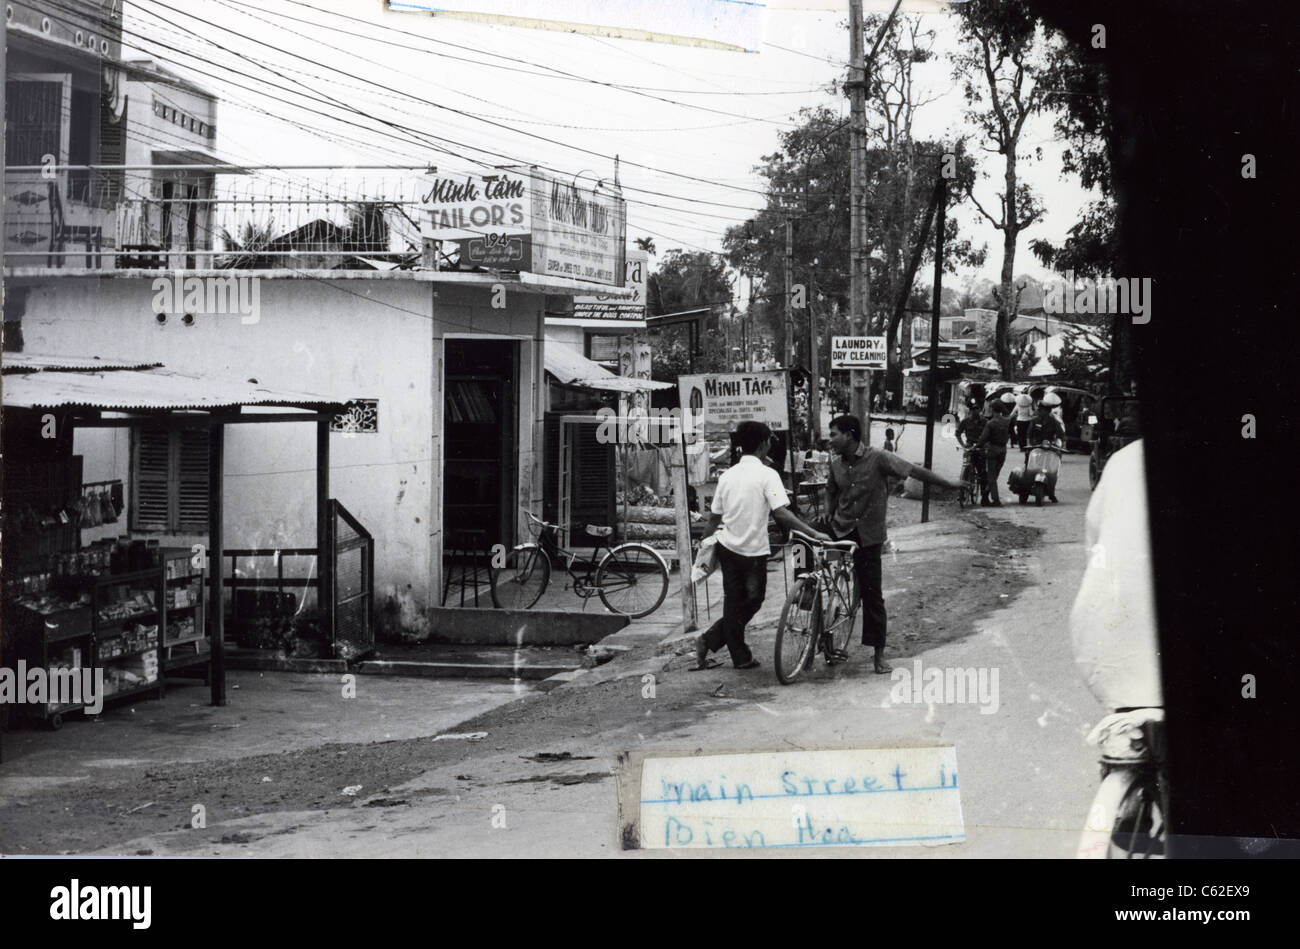 Street scene of Main Street in Bien Hoa, Vietnam in 1965 taken by a U.S. soldier of the 173rd Airborne Bridgade which was one of Stock Photo